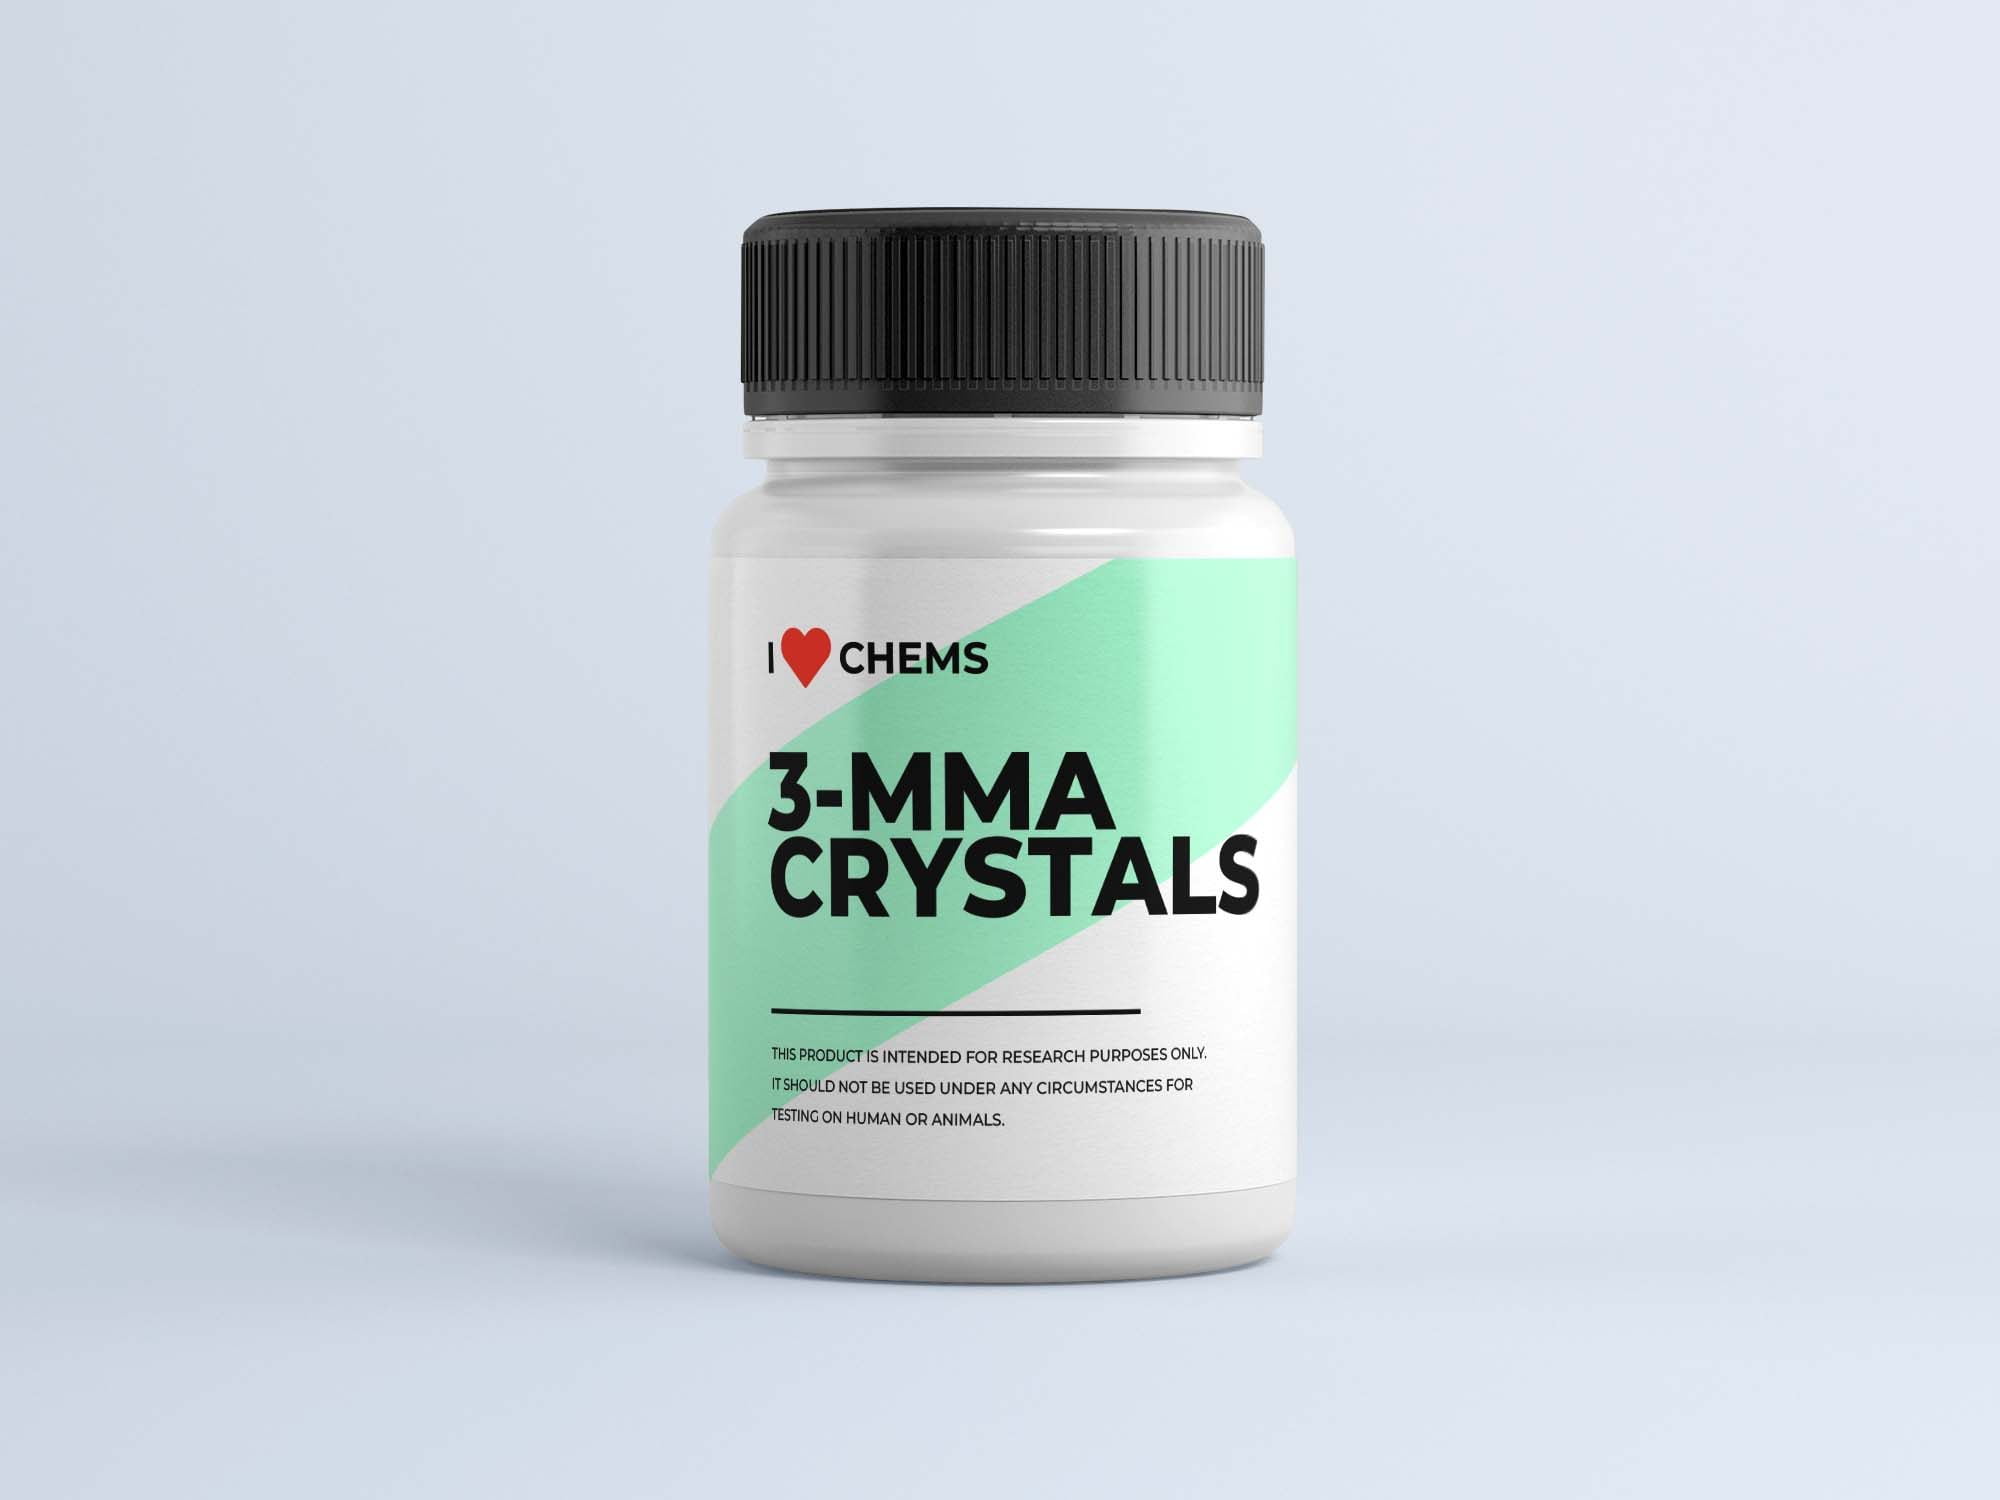 ilovechems rc 3mma crystals-ilovechems